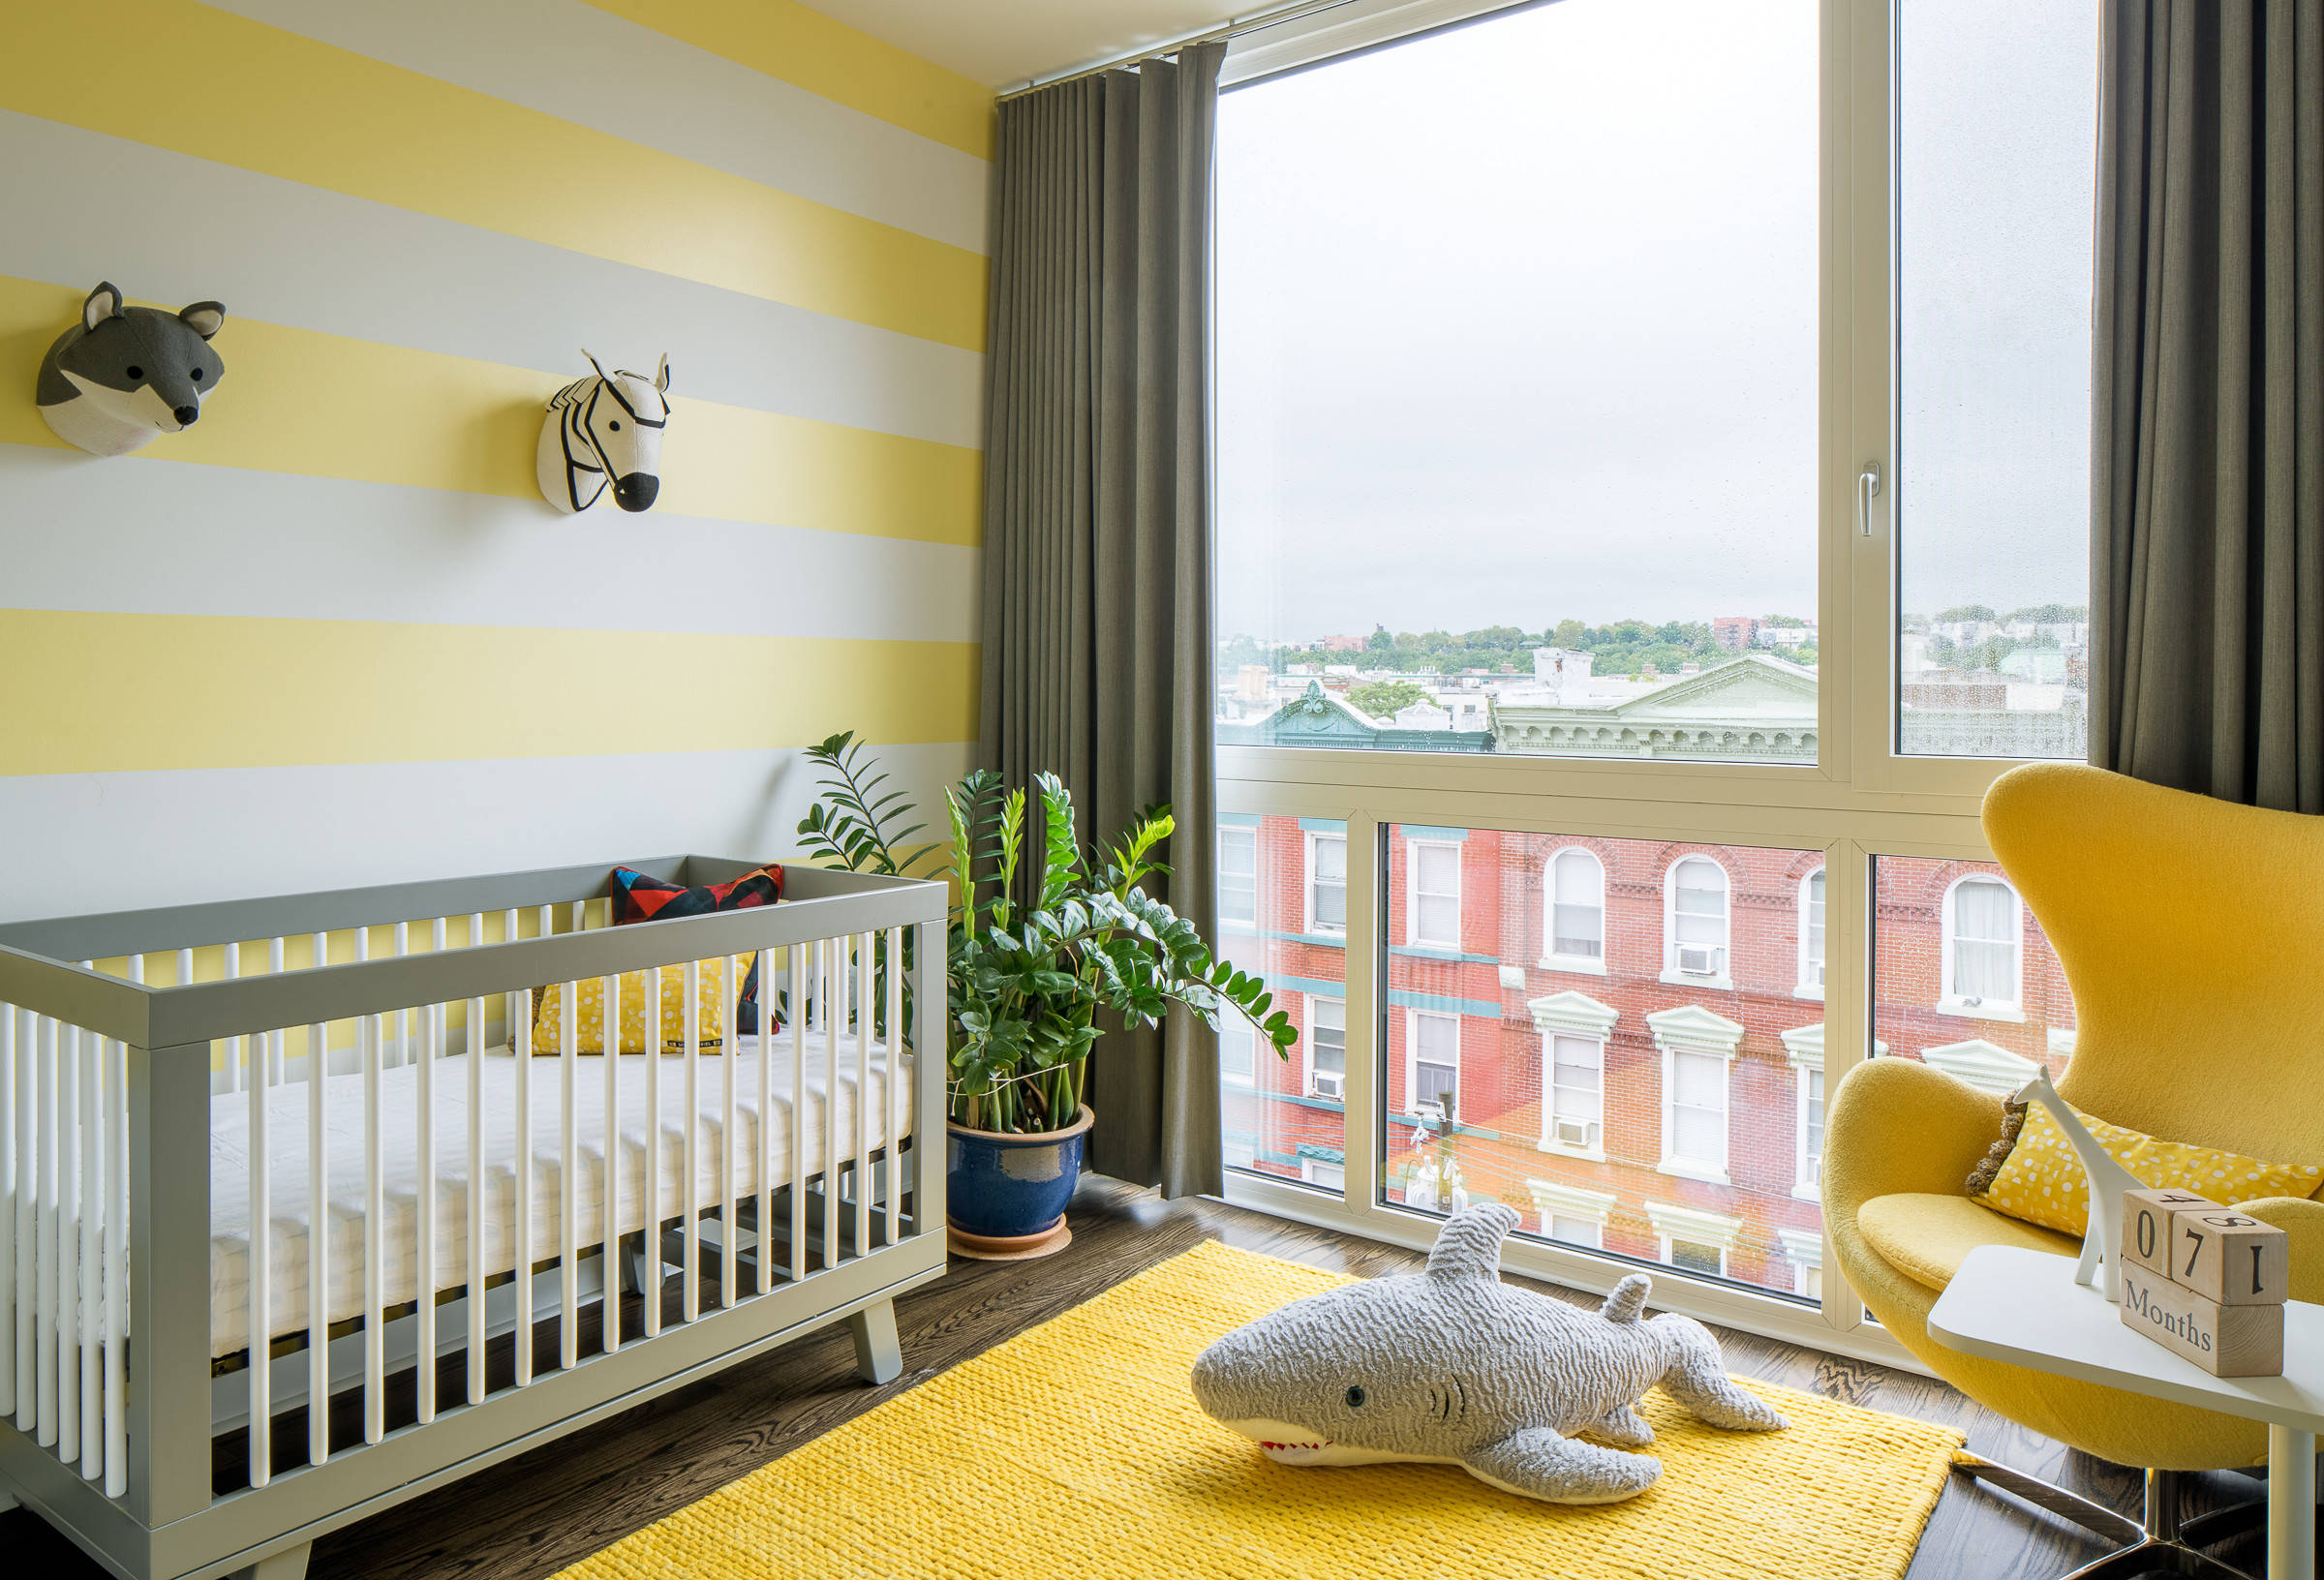 75 Beautiful Nursery Pictures Ideas Color Yellow April 2021 Houzz